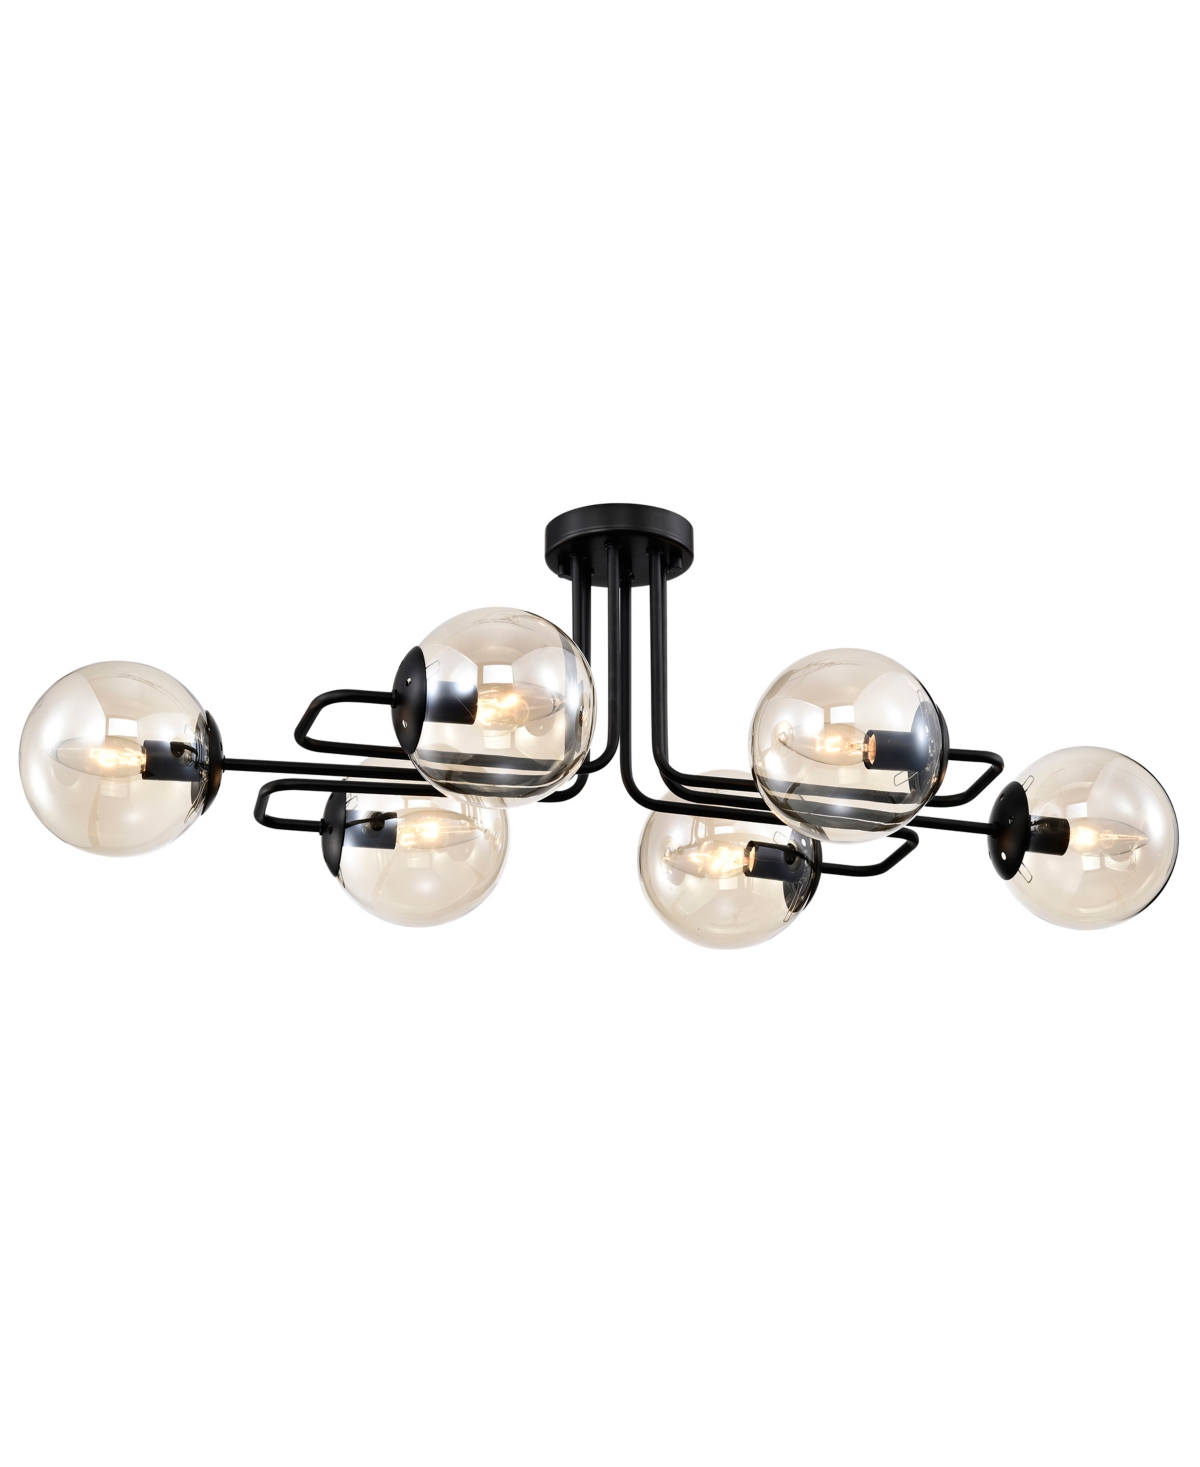 Home Accessories Nuka 37" 6-light Indoor Finish Semi-flush Mount Ceiling Light With Light Kit In Matte Black